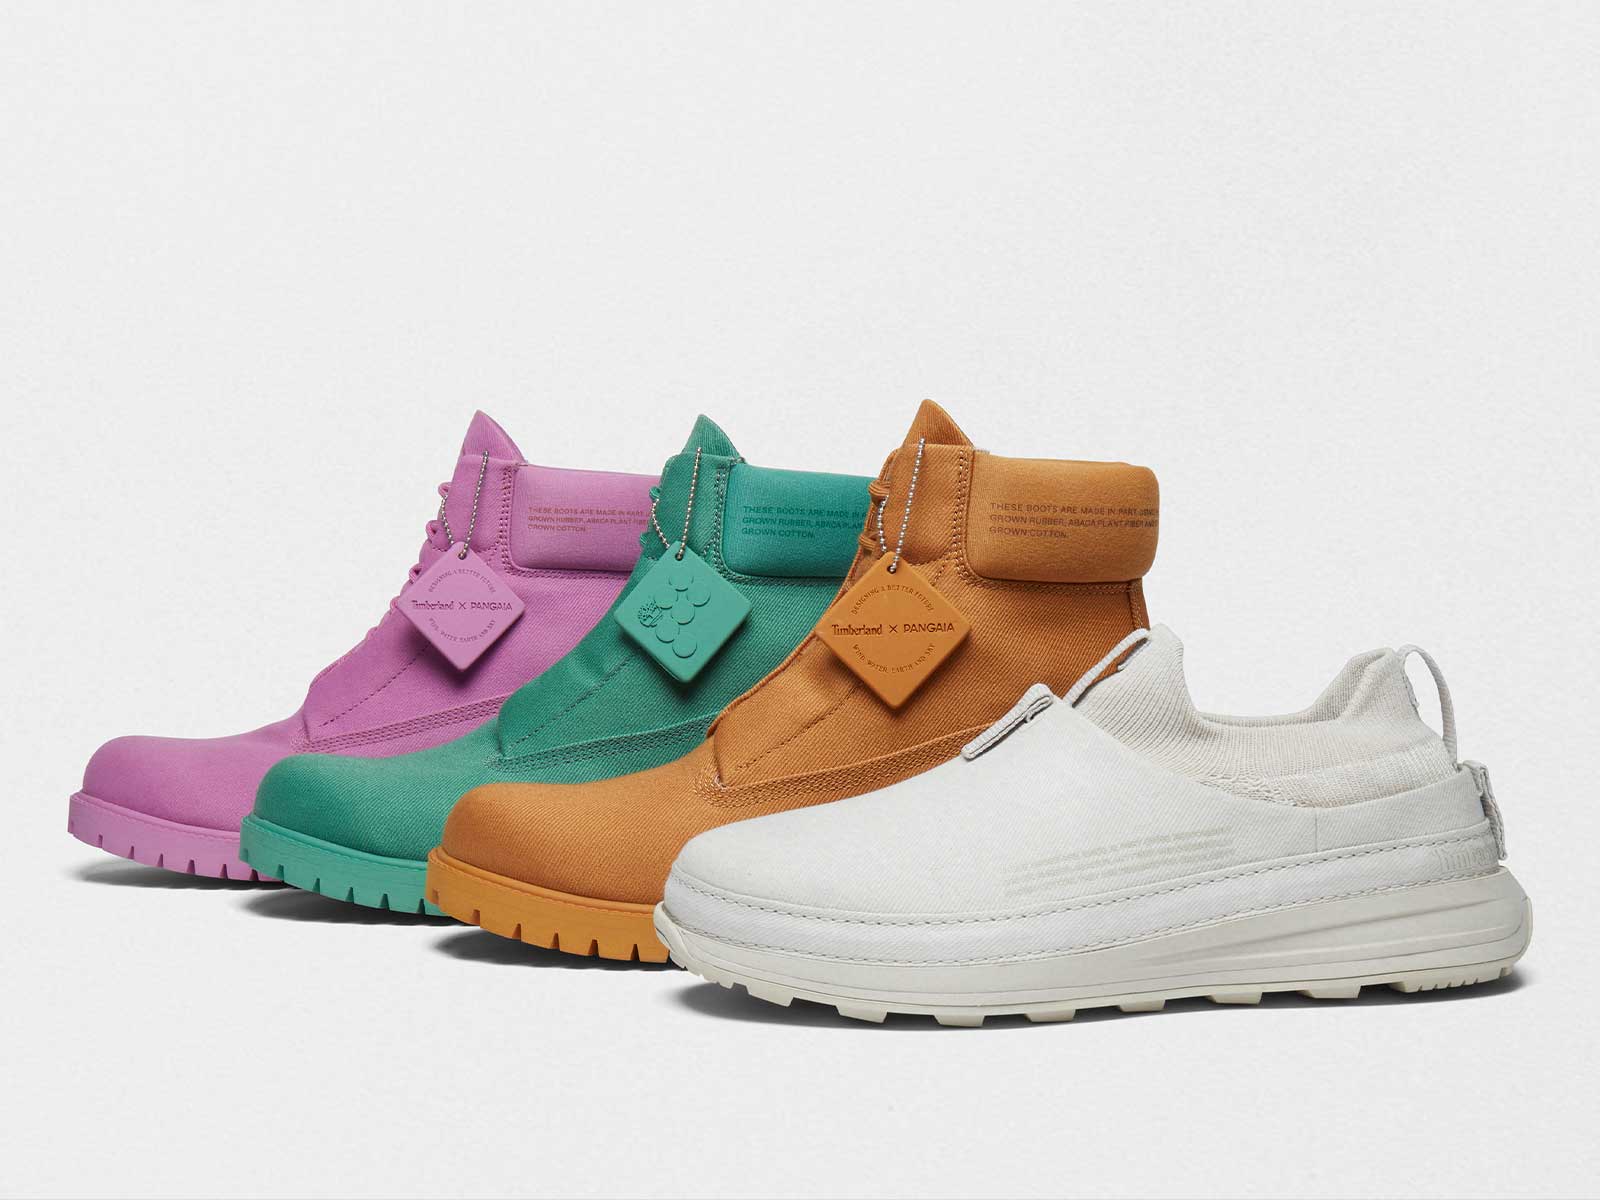 PANGAIA brings colour to Timberland’s most classic silhouette